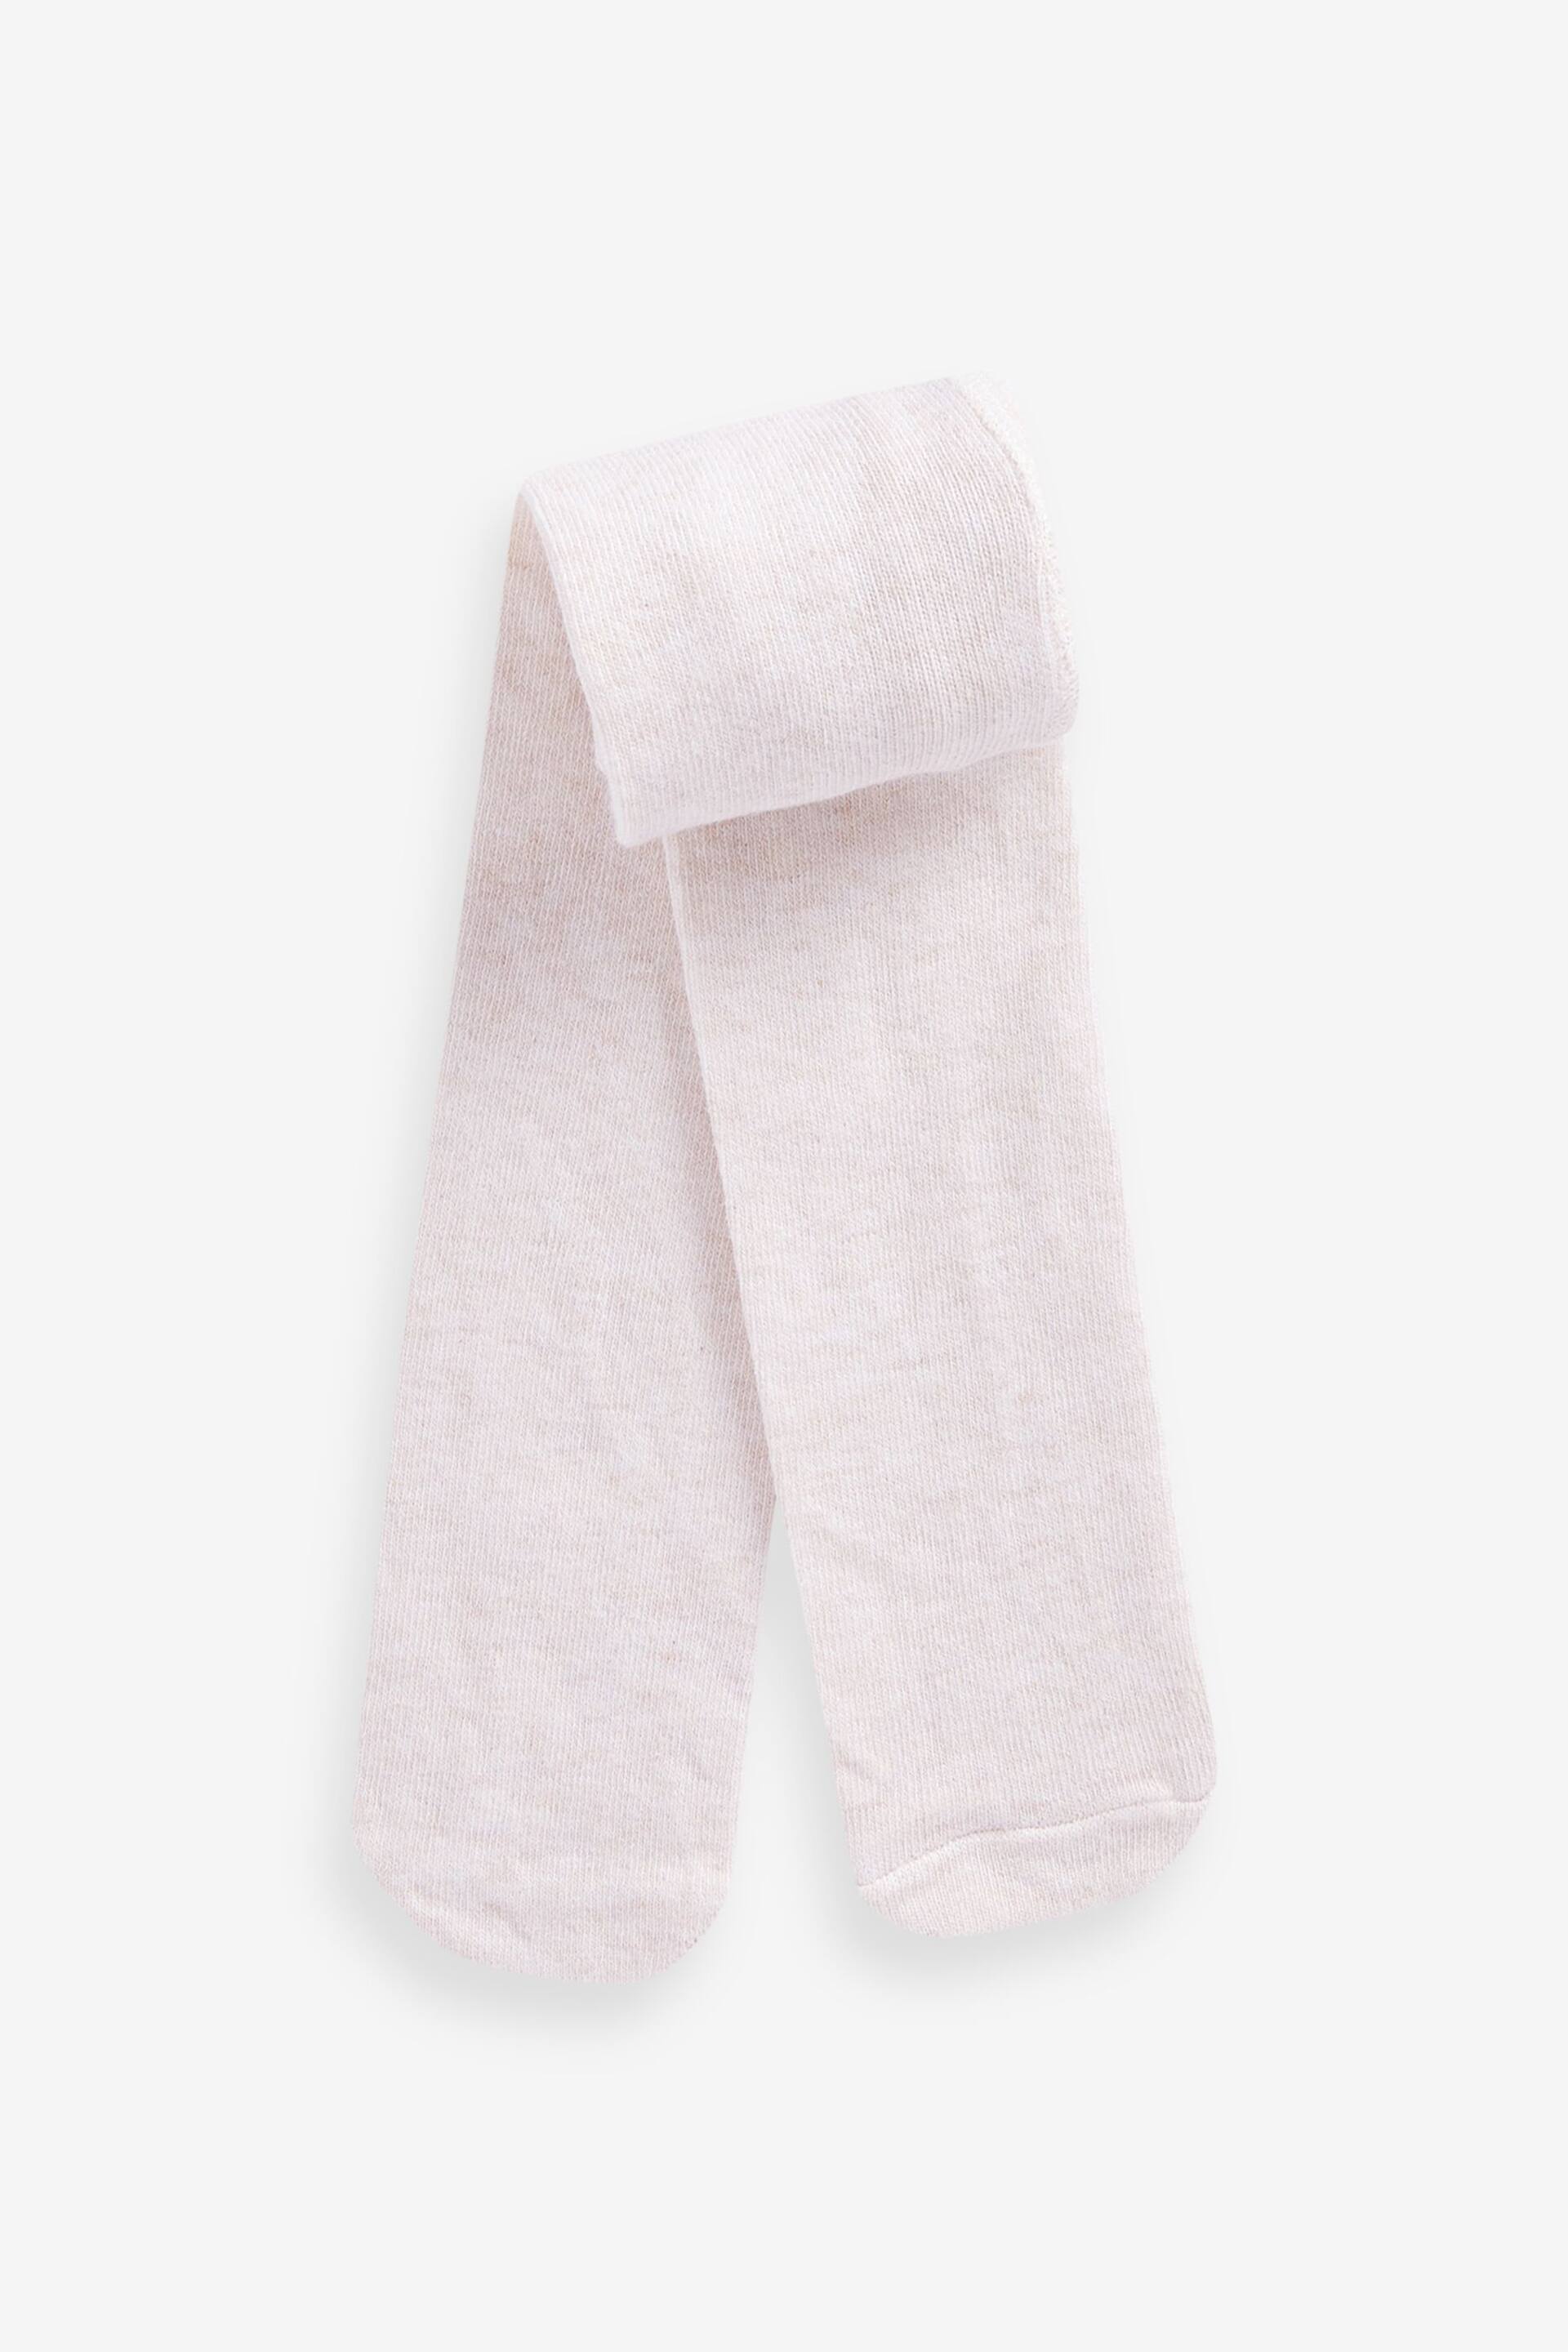 Pink/Neutral Baby Plain Tights 3 Packs (0mths-2yrs) - Image 2 of 4